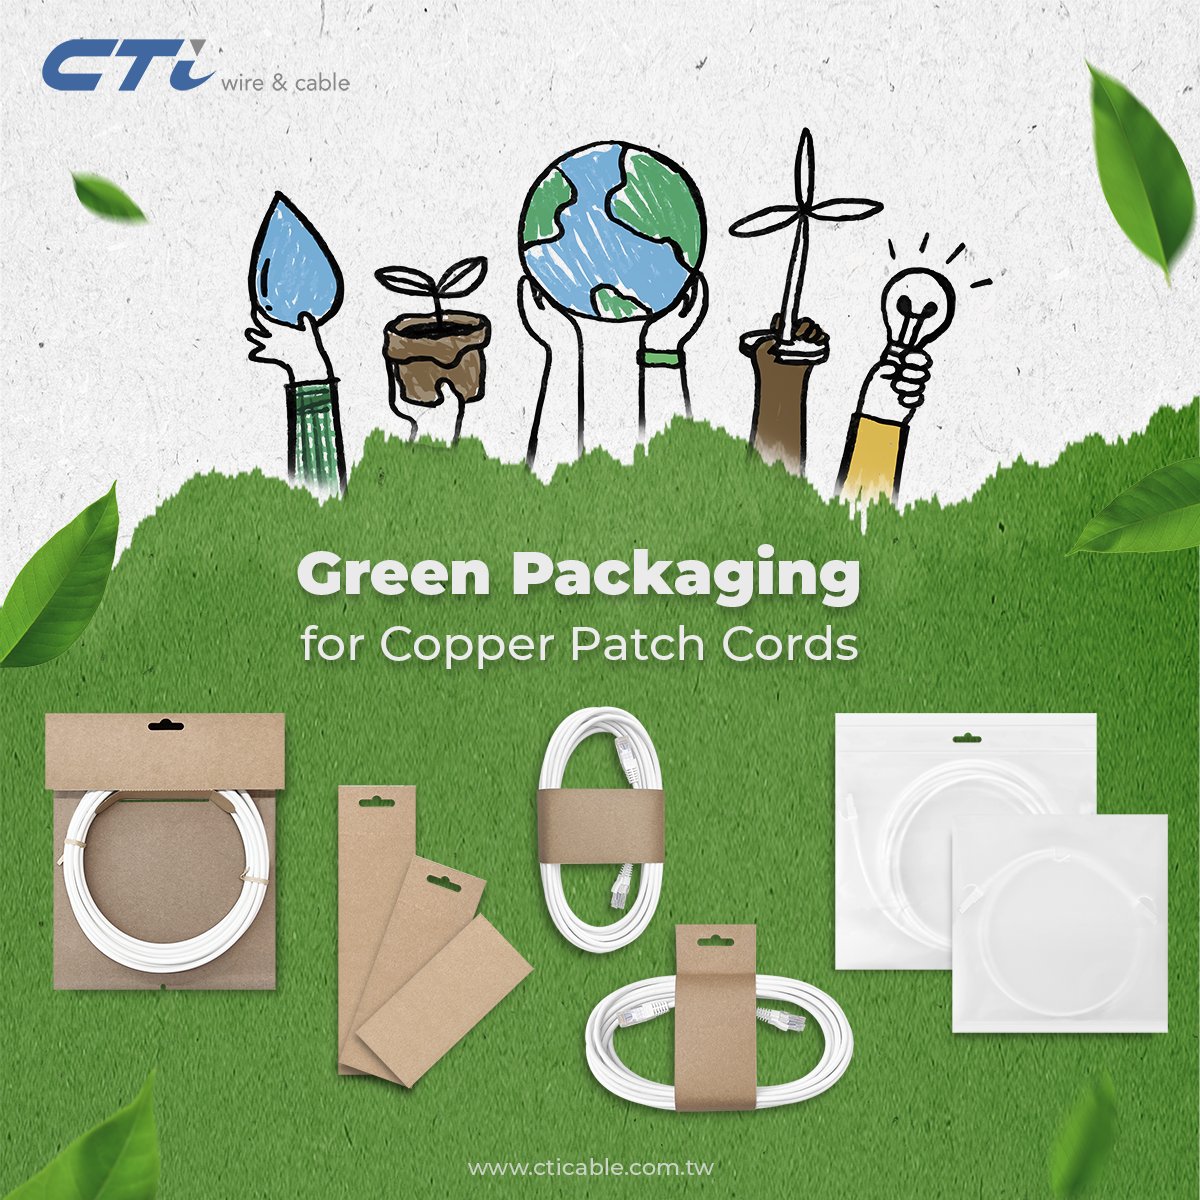 CTi Patch Cord Goes Plastic-free!

Read more: bit.ly/3qLnwYc

#greenpackaging #sustainable #ecofriendly #gogreen #patchcord #plasticfree #sustainability #eco